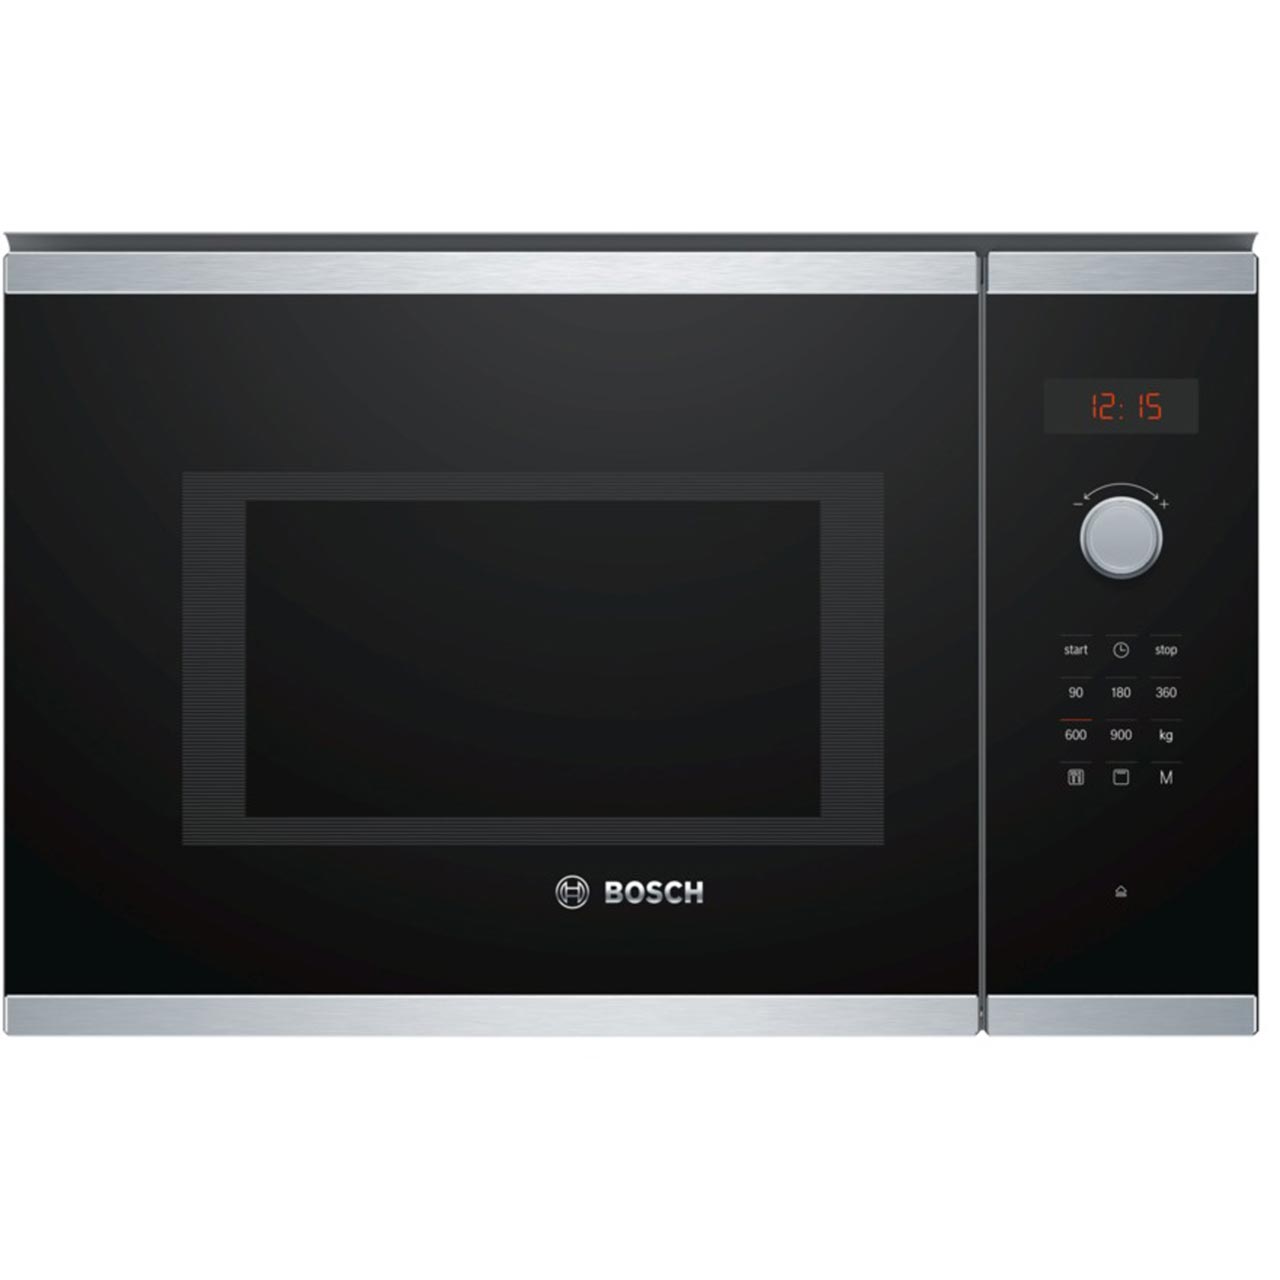 Bosch Series 4 BEL553MS0B Built In 38cm Tall Compact Microwave - Stainless Steel, Stainless Steel